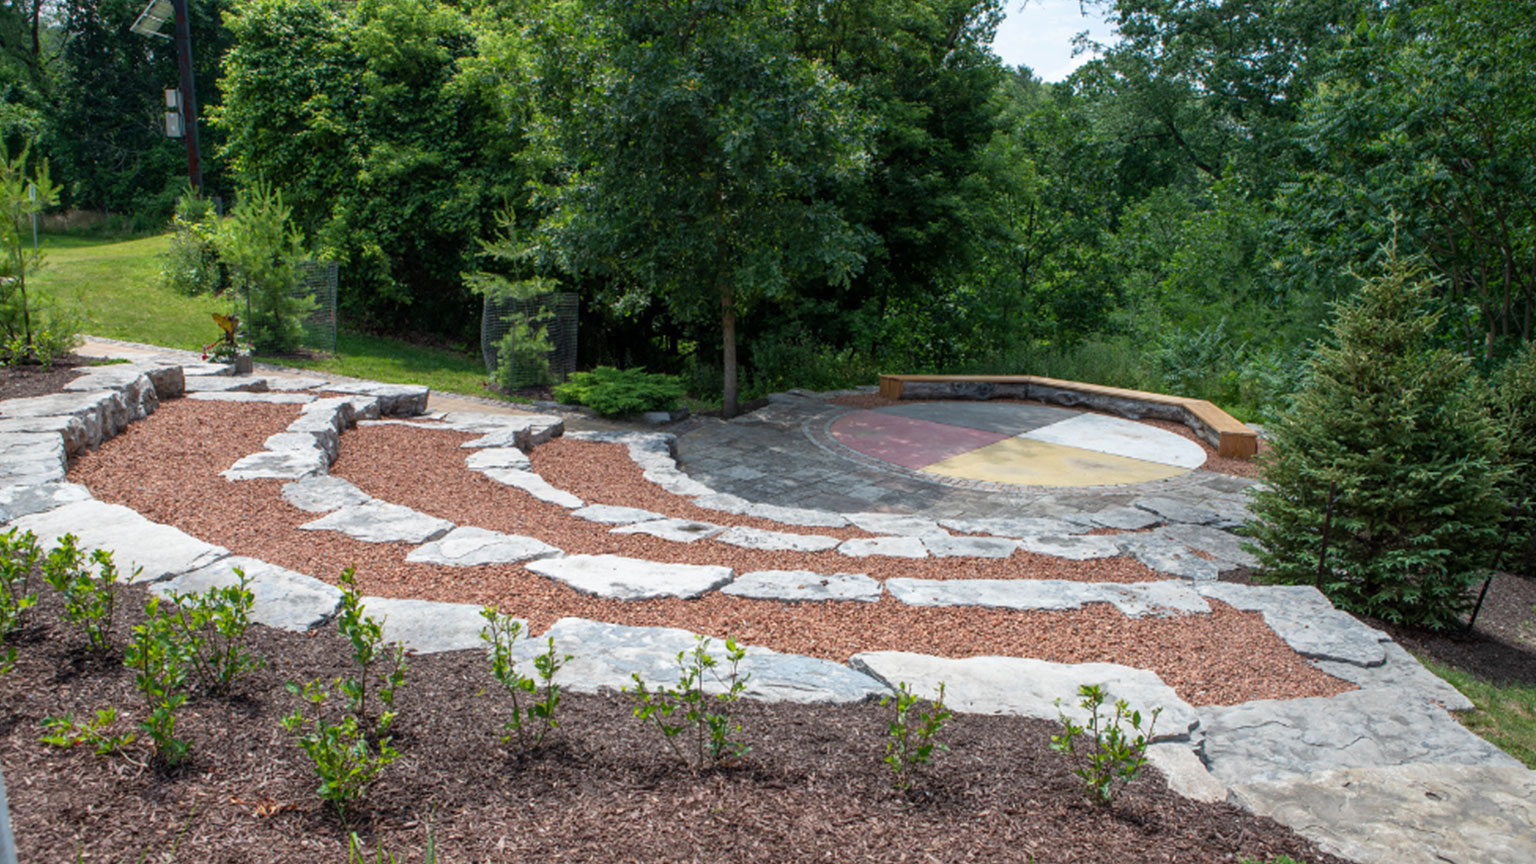 The Indigenous Circle features tiered stone arranged around a stage in the form of a medicine wheel, a symbol that represents the interconnectivity of all beings. Plantings in the space were sourced from Six Nations of the Grand River